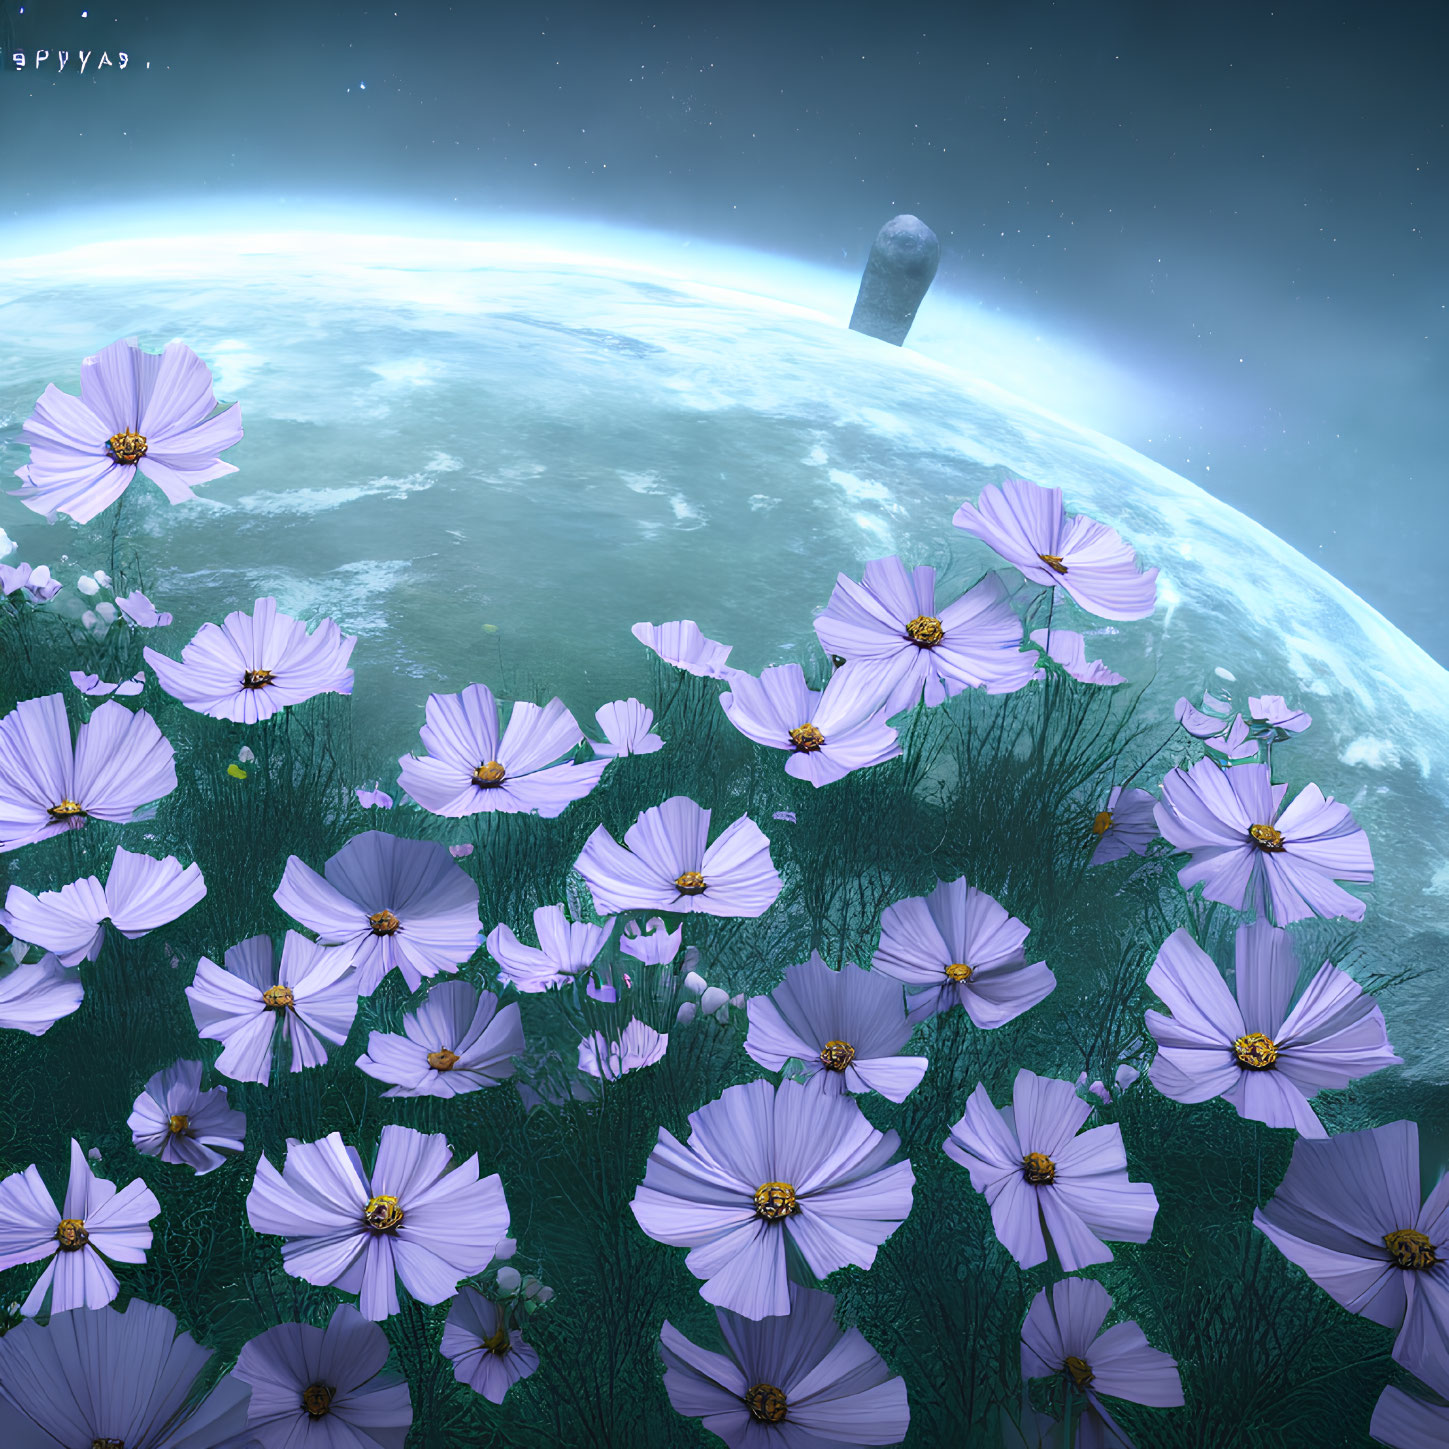 Purple Flowers Field with Planet and Moon in Starry Sky